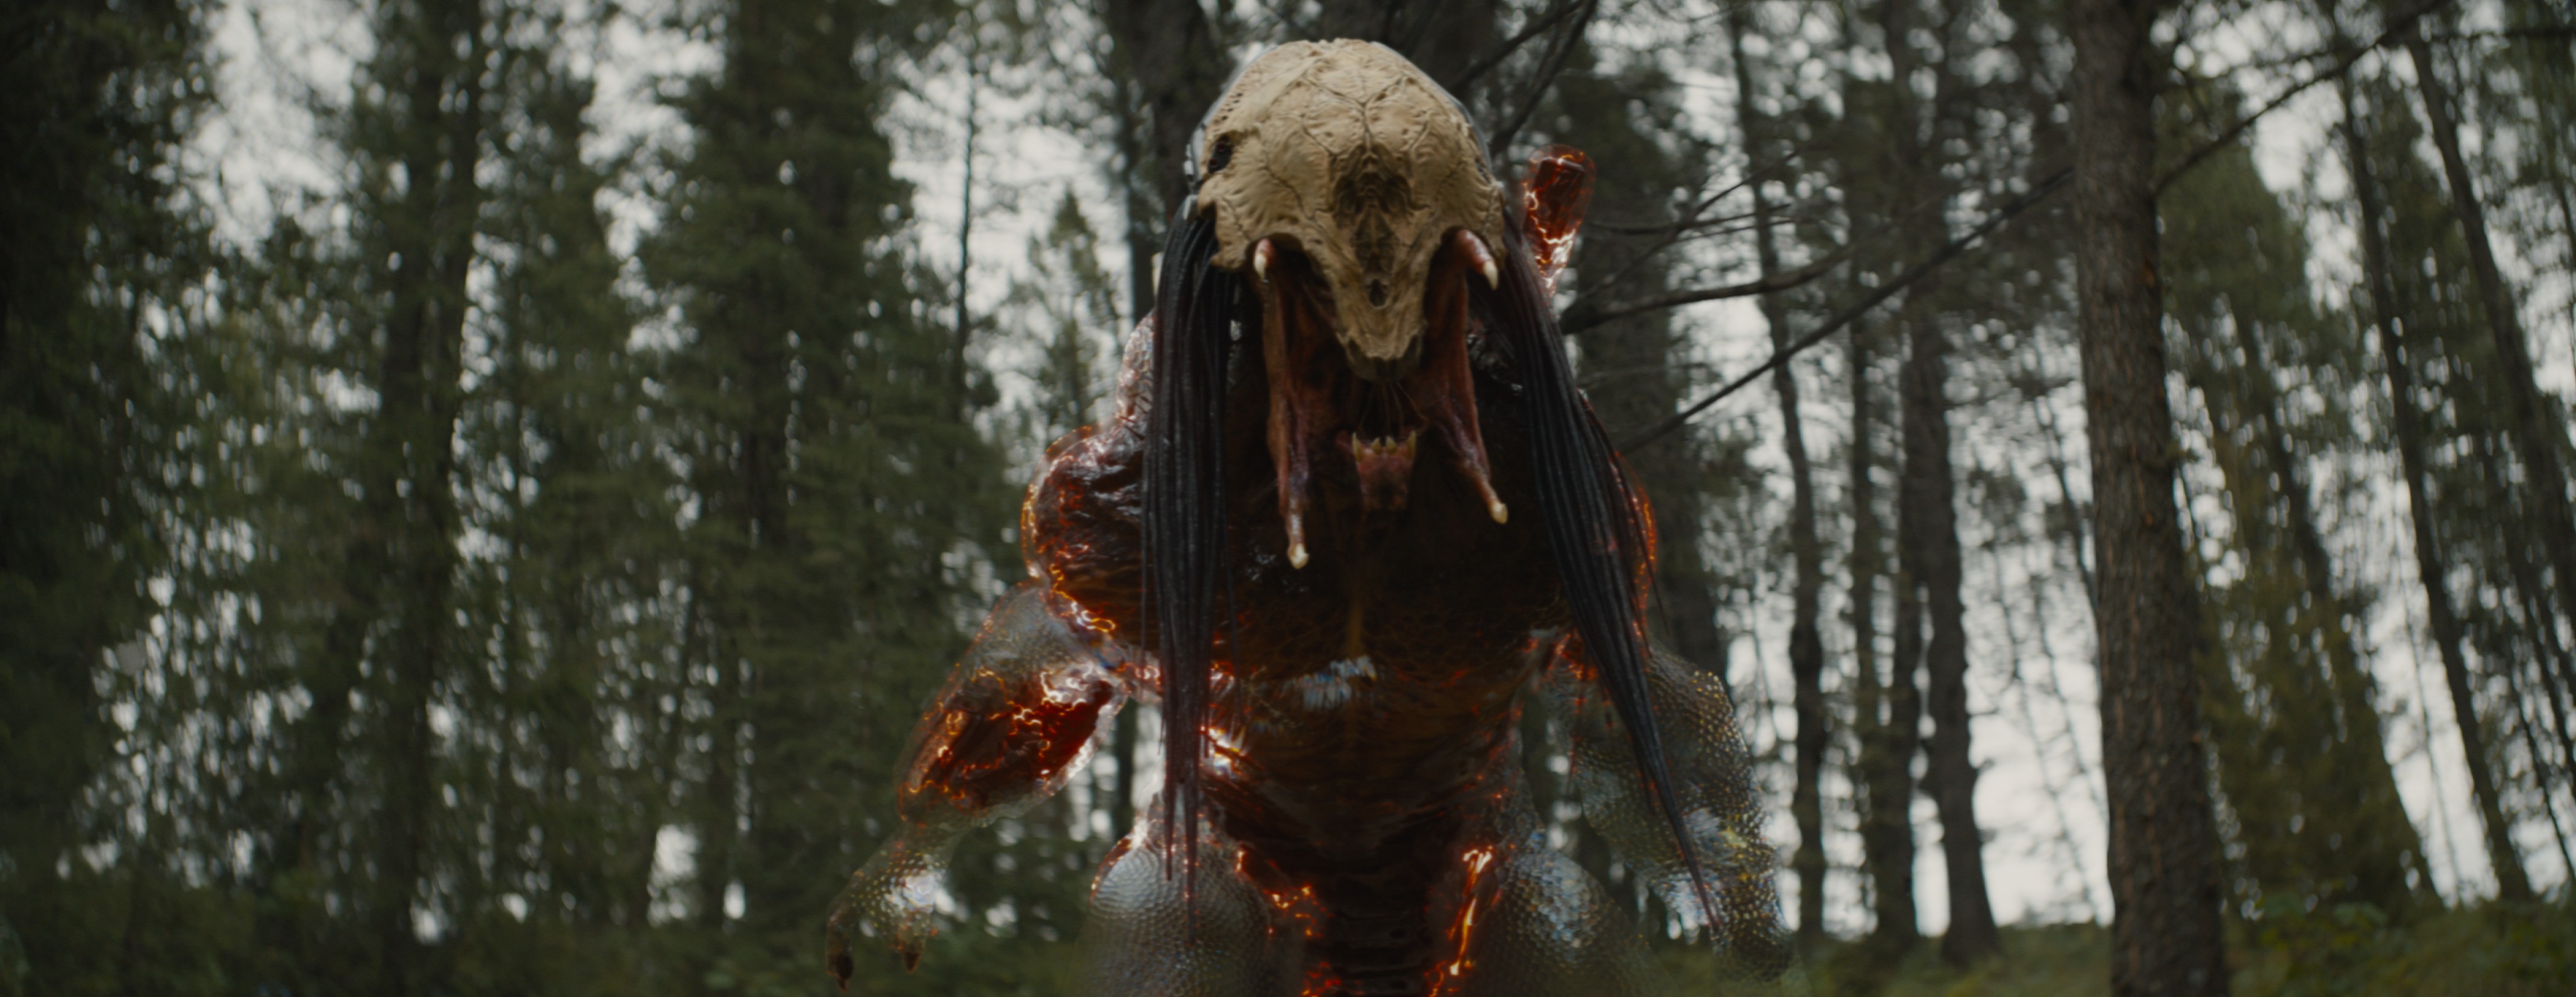 A shot of the Predator de-cloaking in a scene from Prey, after visual effects are applied.